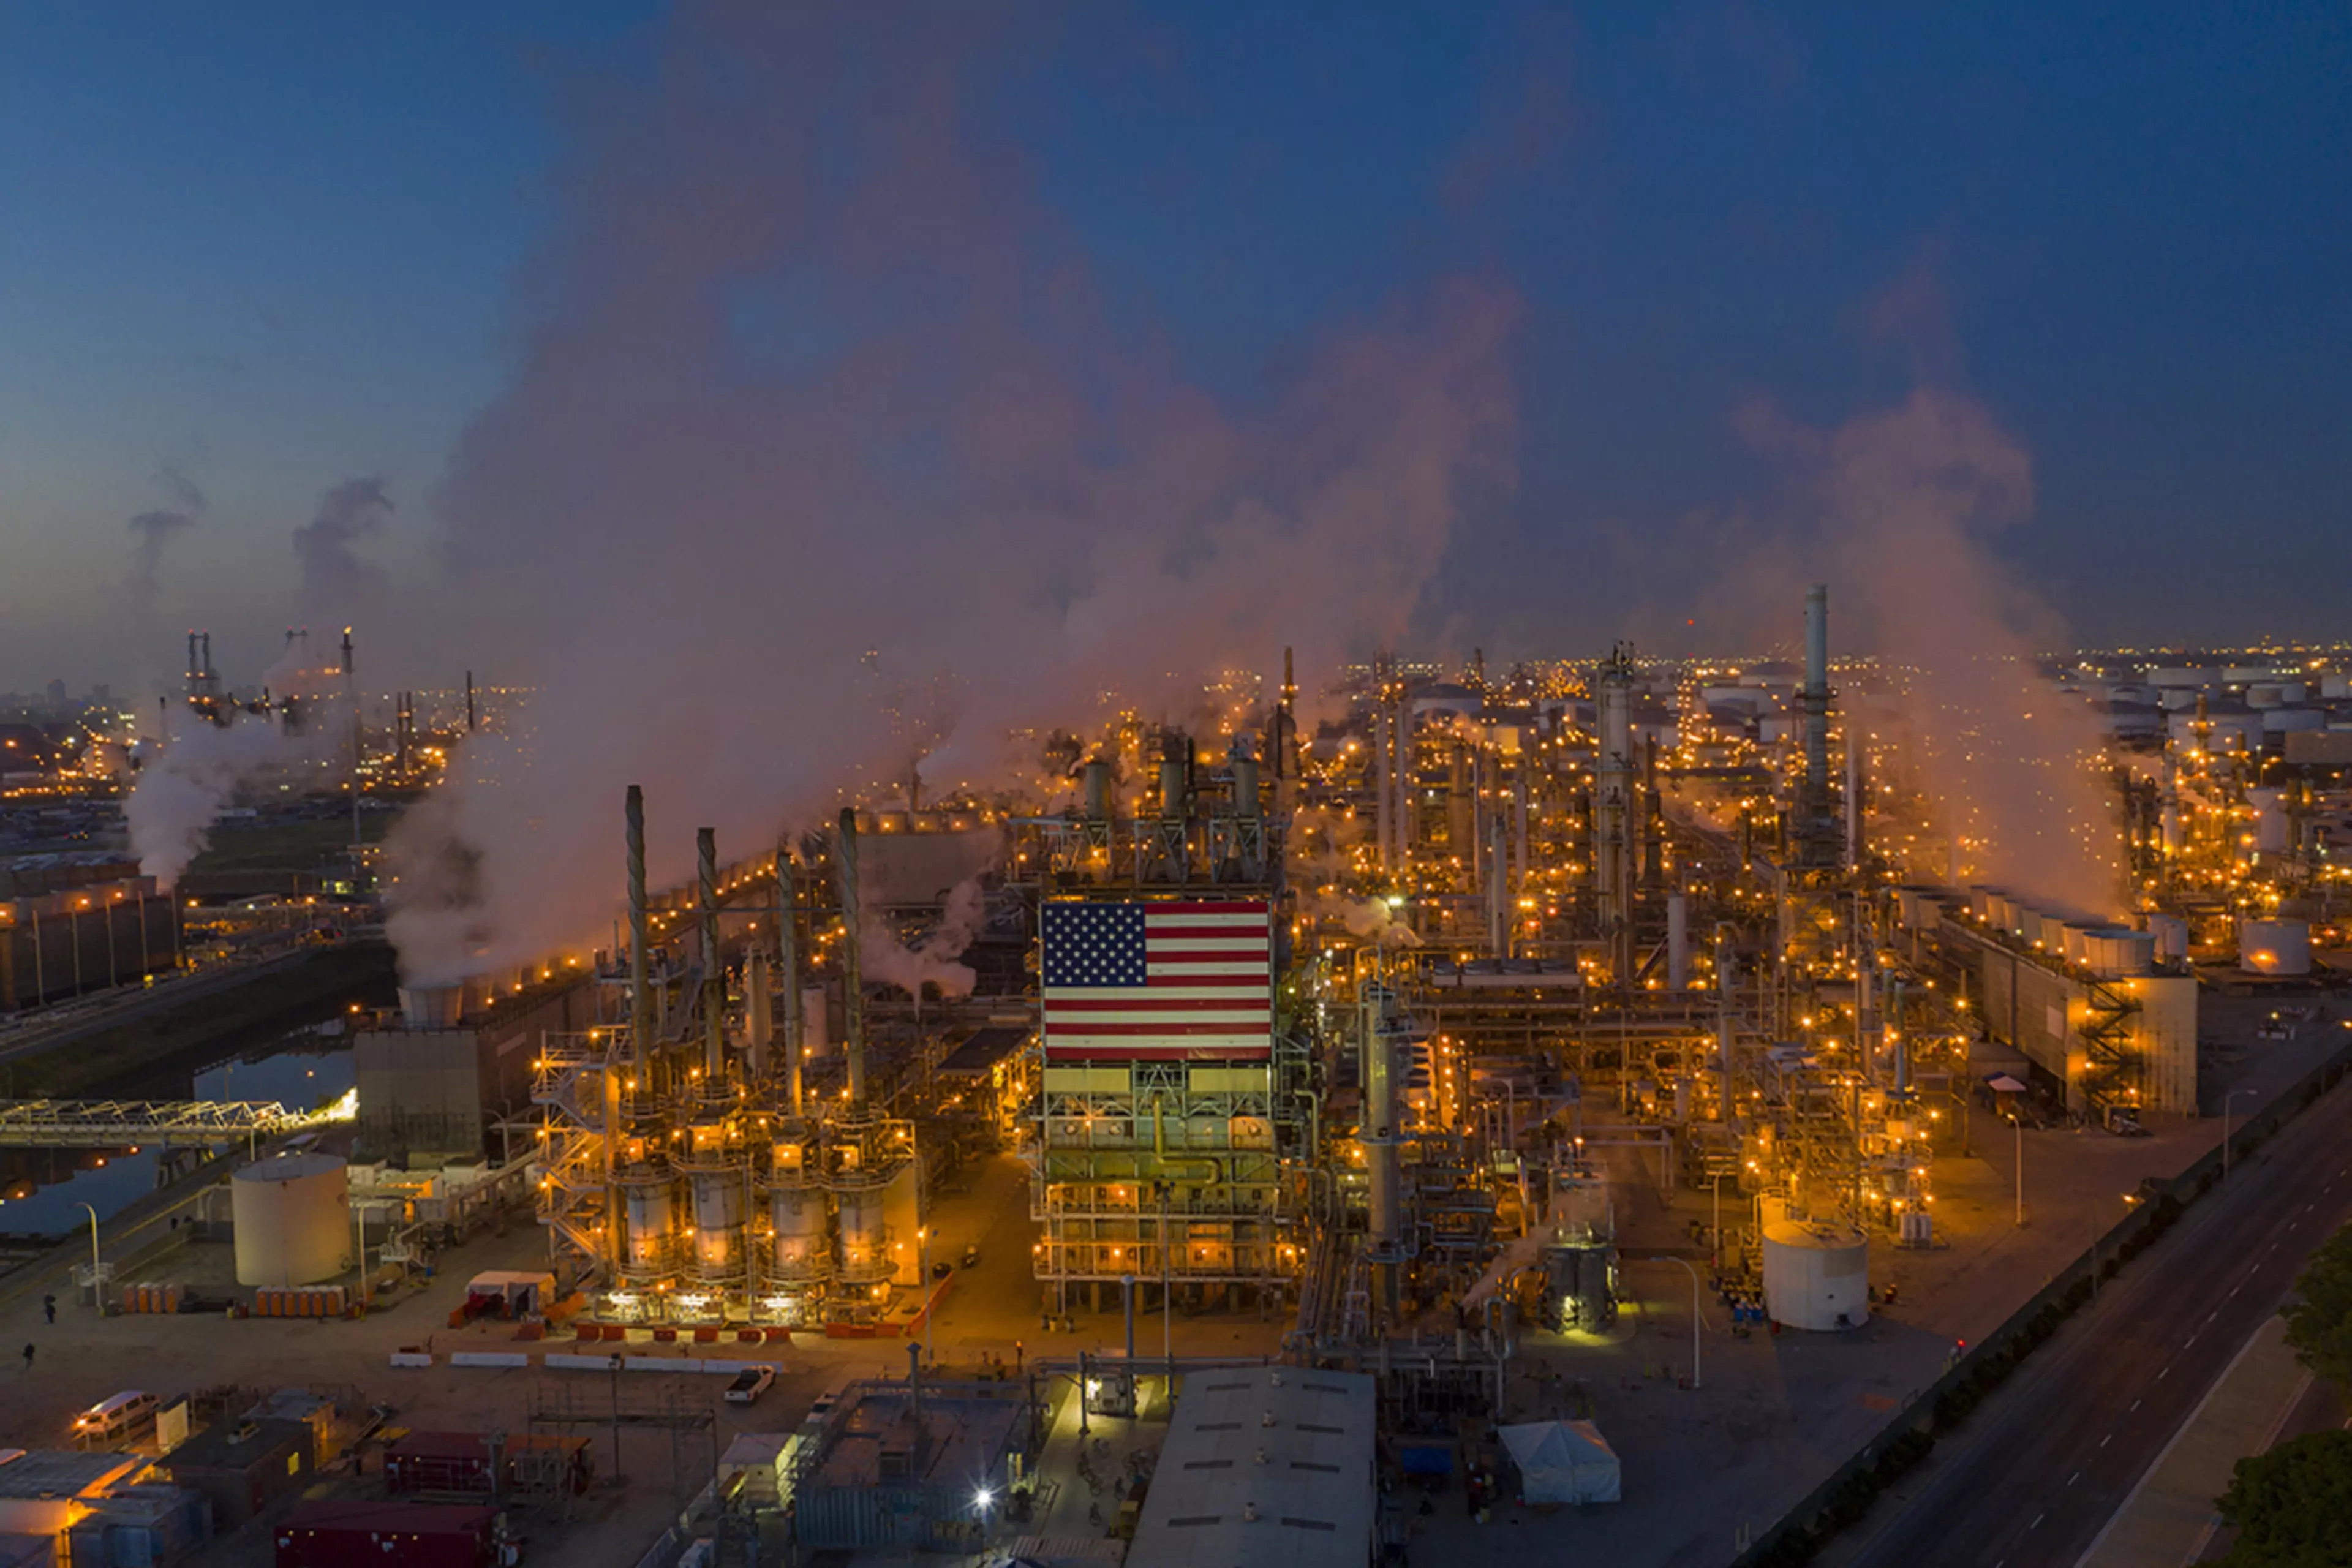 The United States refines millions of barrels of oil every day.